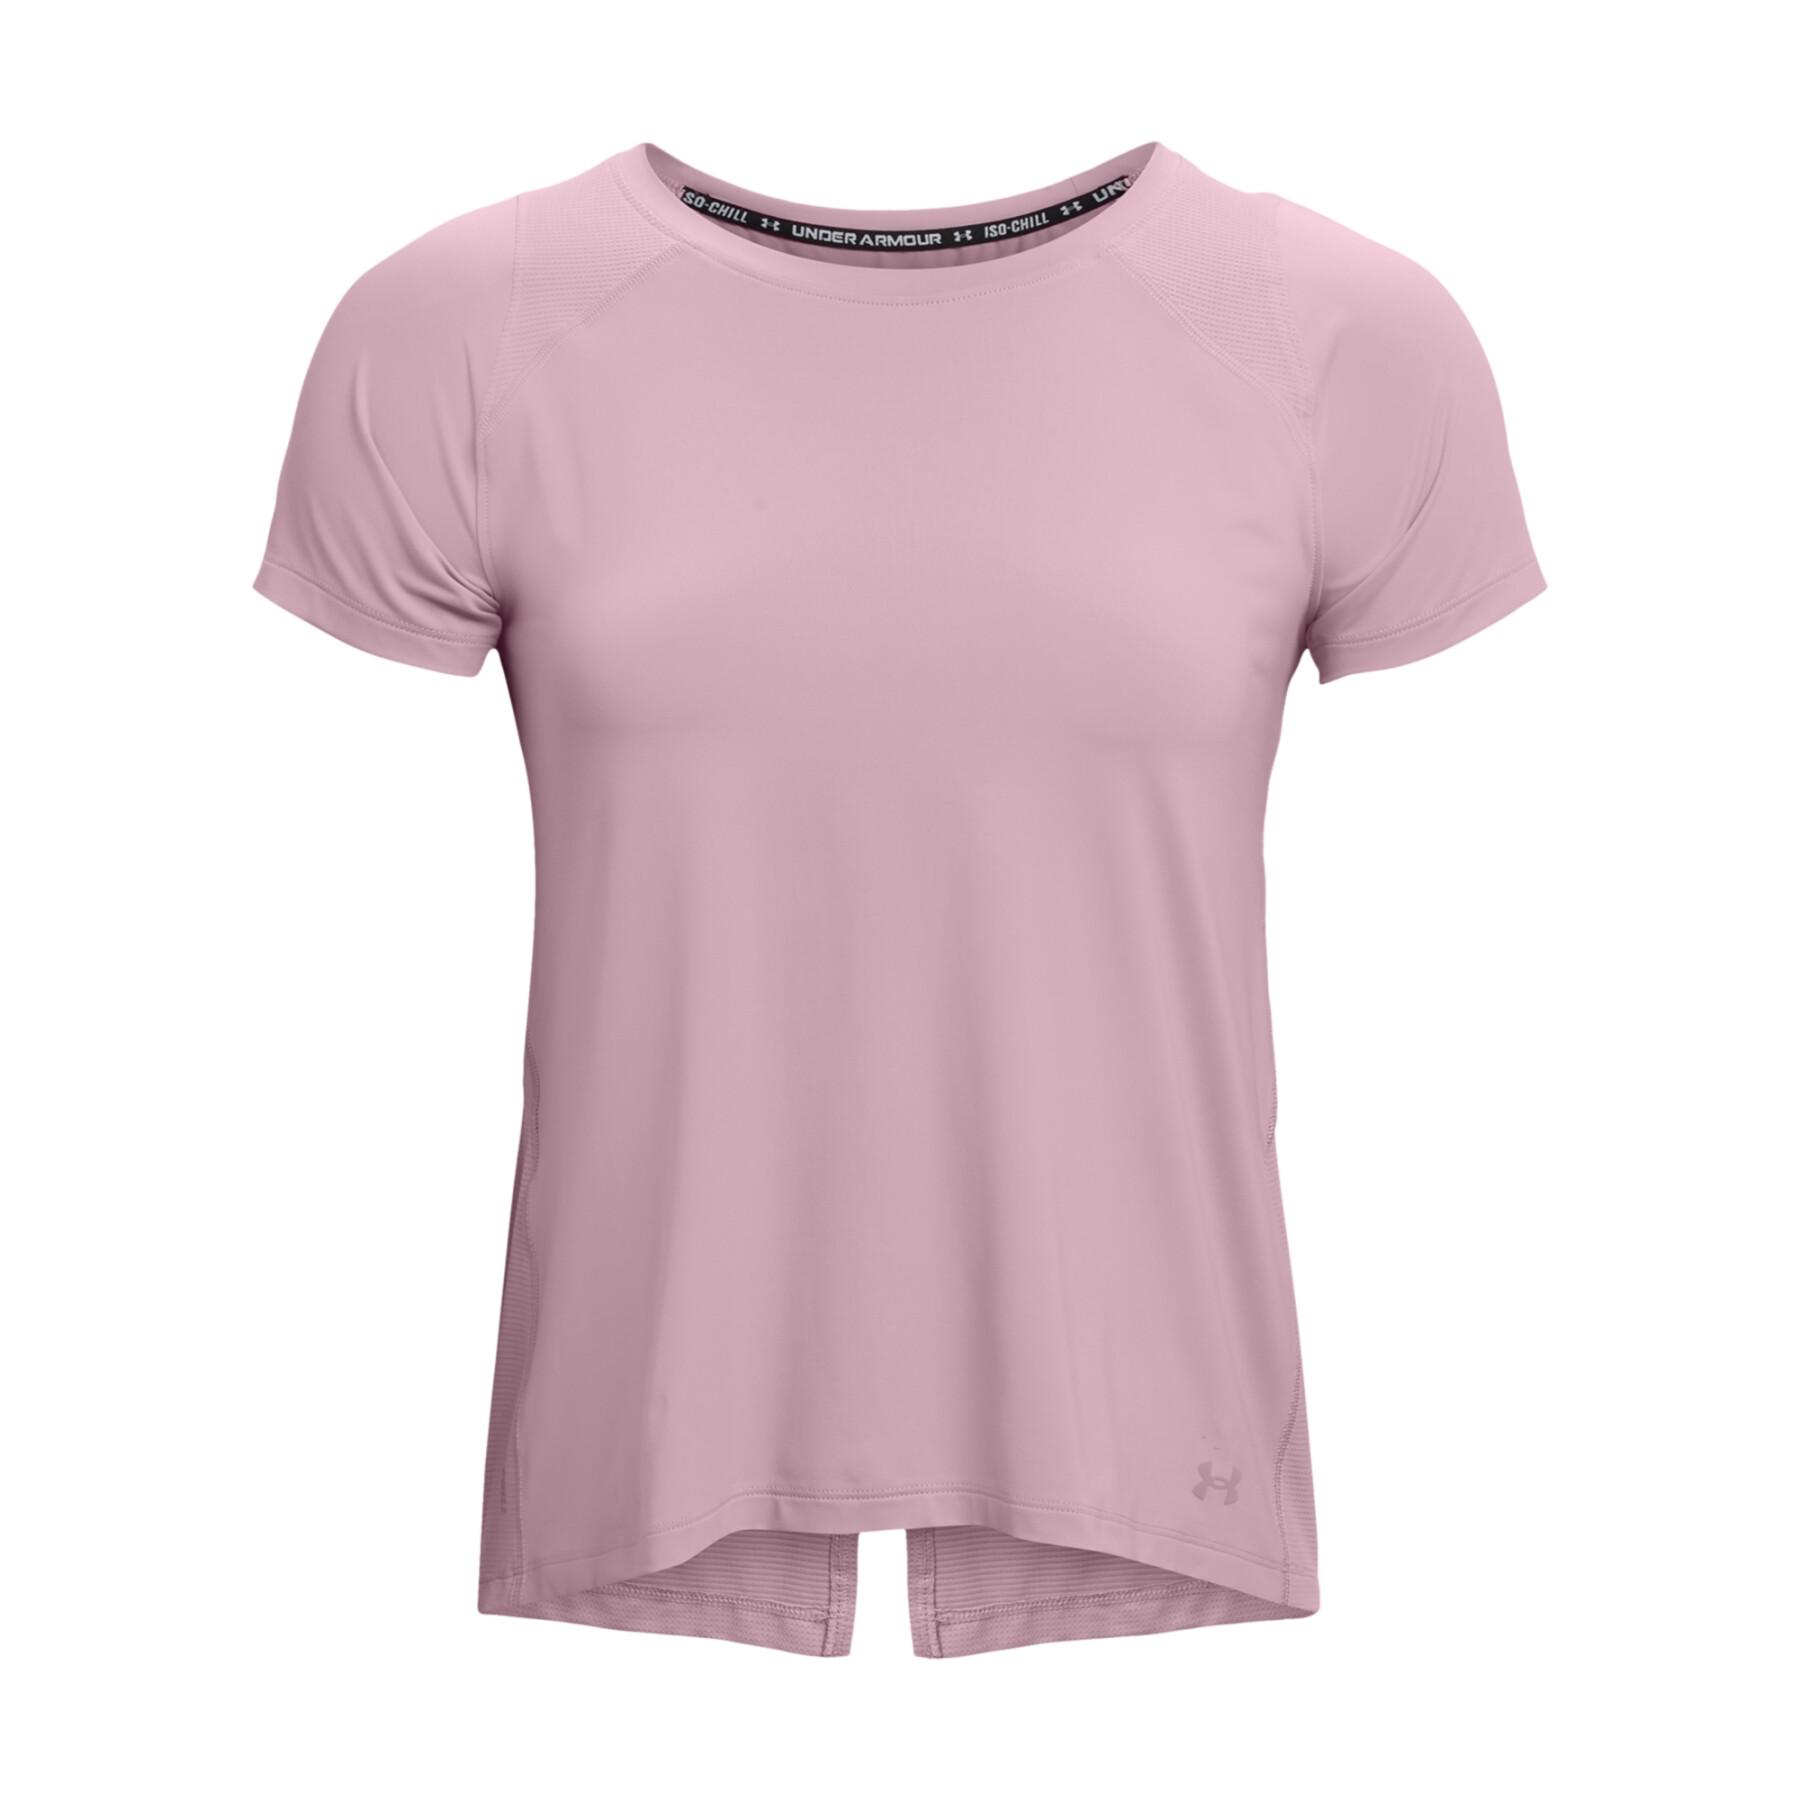 Maillot femme Under Armour Iso-Chill Run